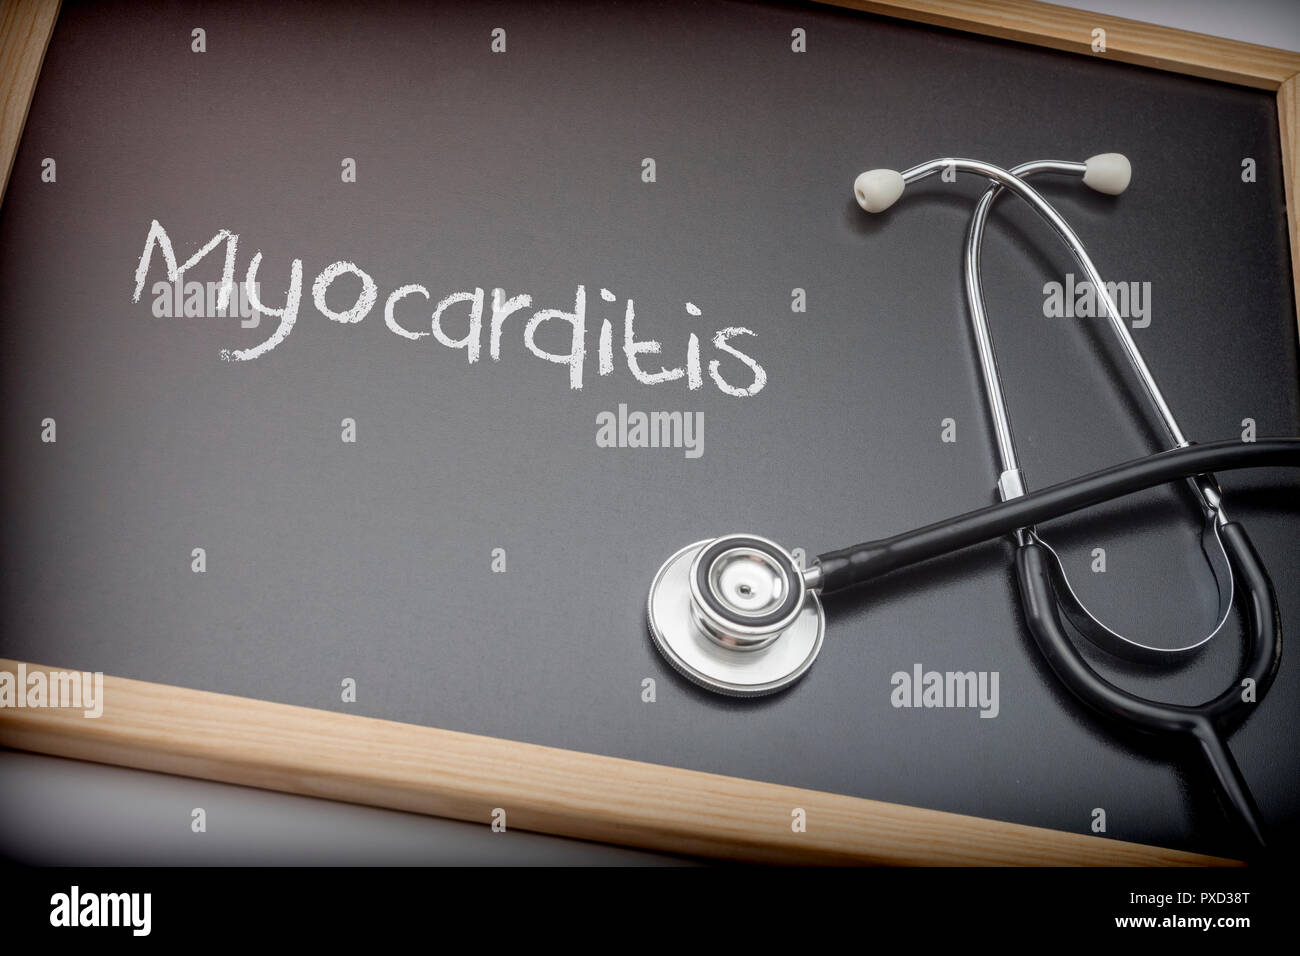 Word Myocarditis written in chalk on a blackboard black next to a stethoscope, conceptual image Stock Photo